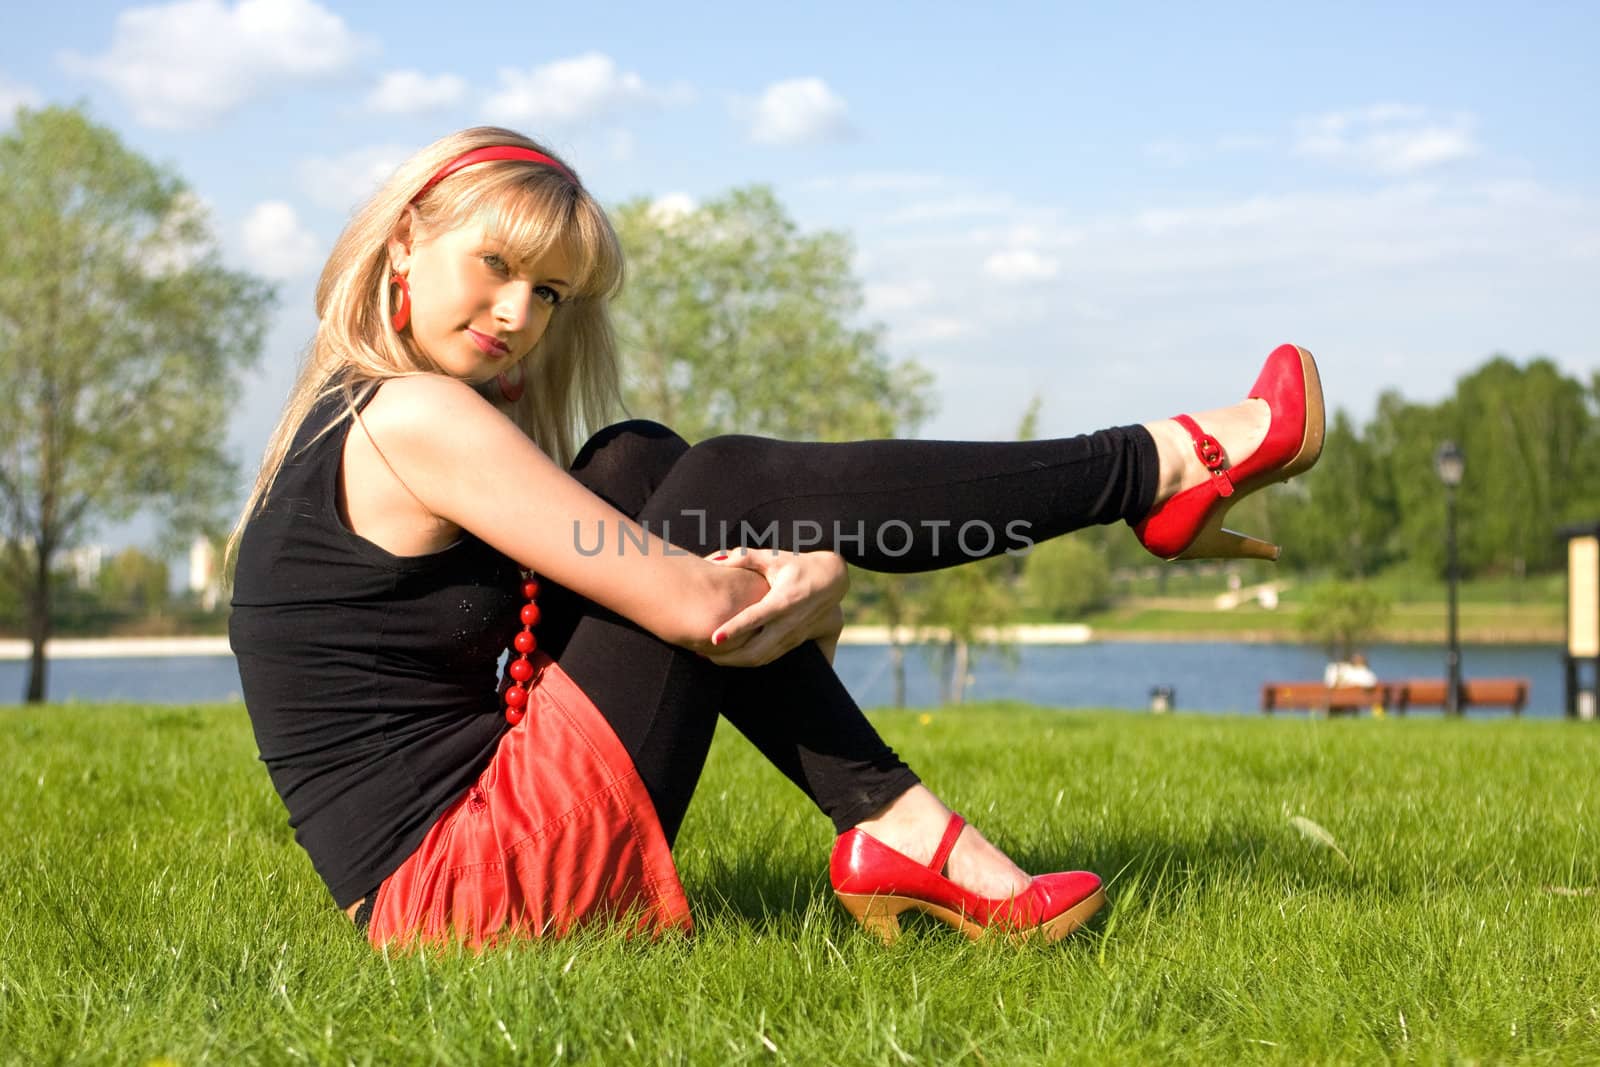 The girl sits on a grass by MIL